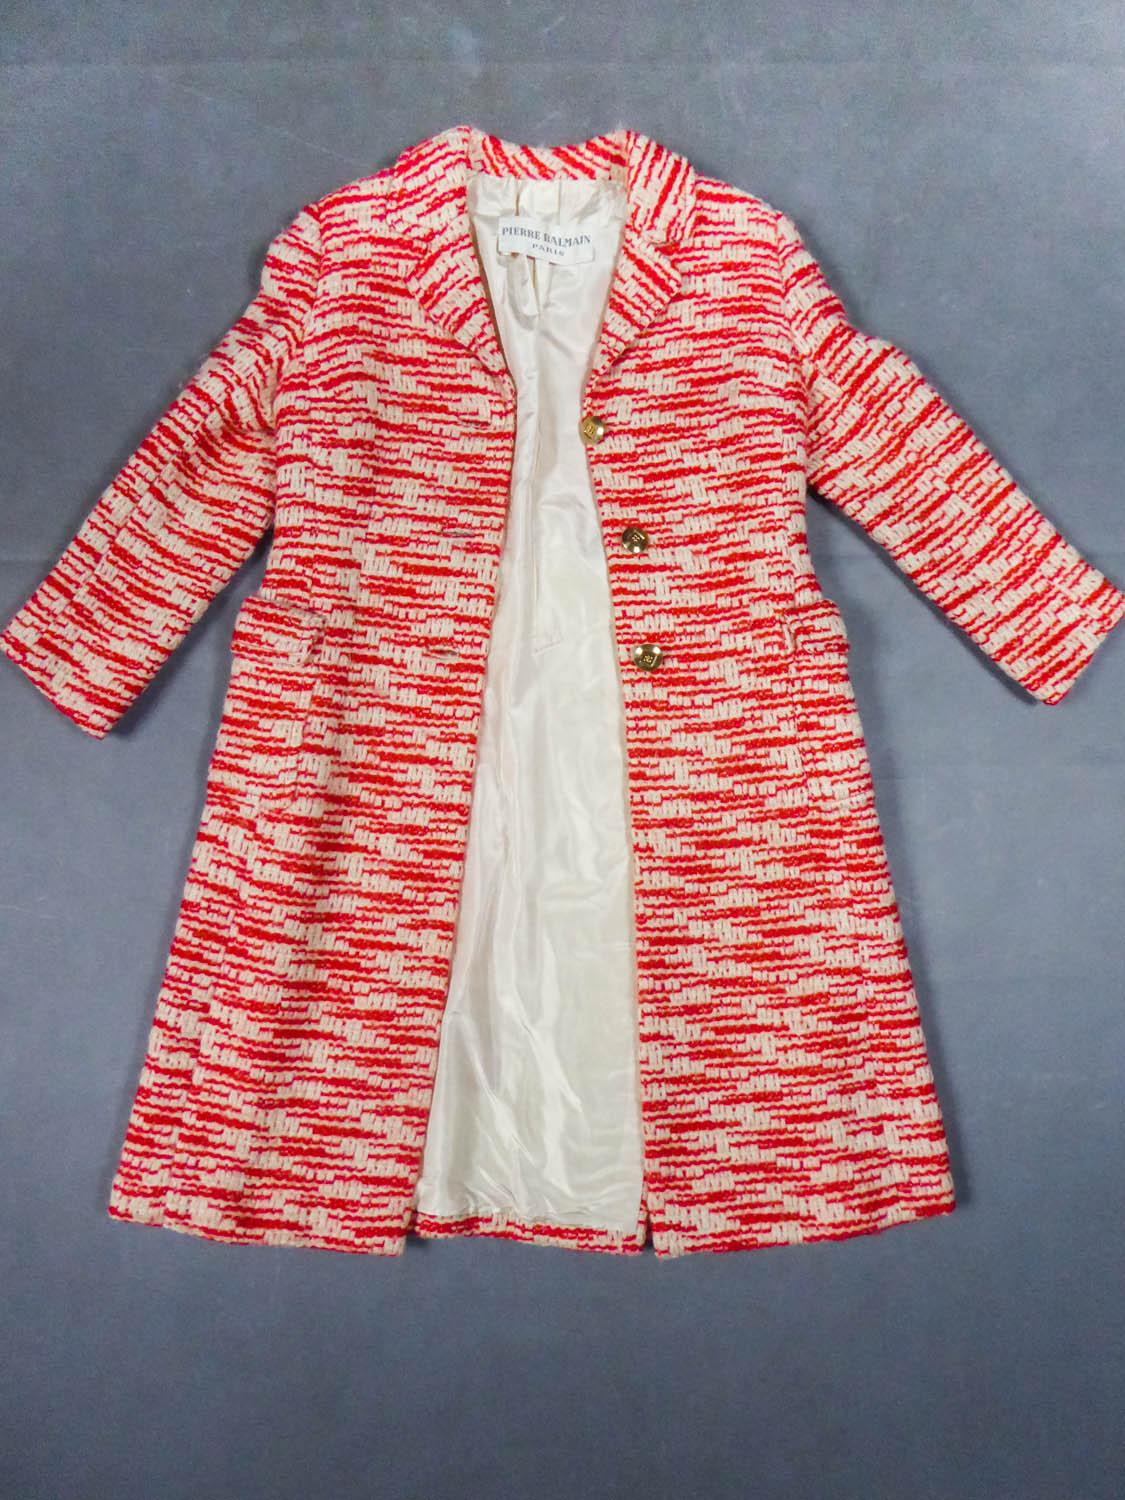 Circa 1970
France

Coat in two-tone red and white knitted wool with geometric non-repeating patterns from the famous Couture designer house Pierre Balmain. Large stitching and fitted cut with wide, slightly flared collar and chasuble cut at the